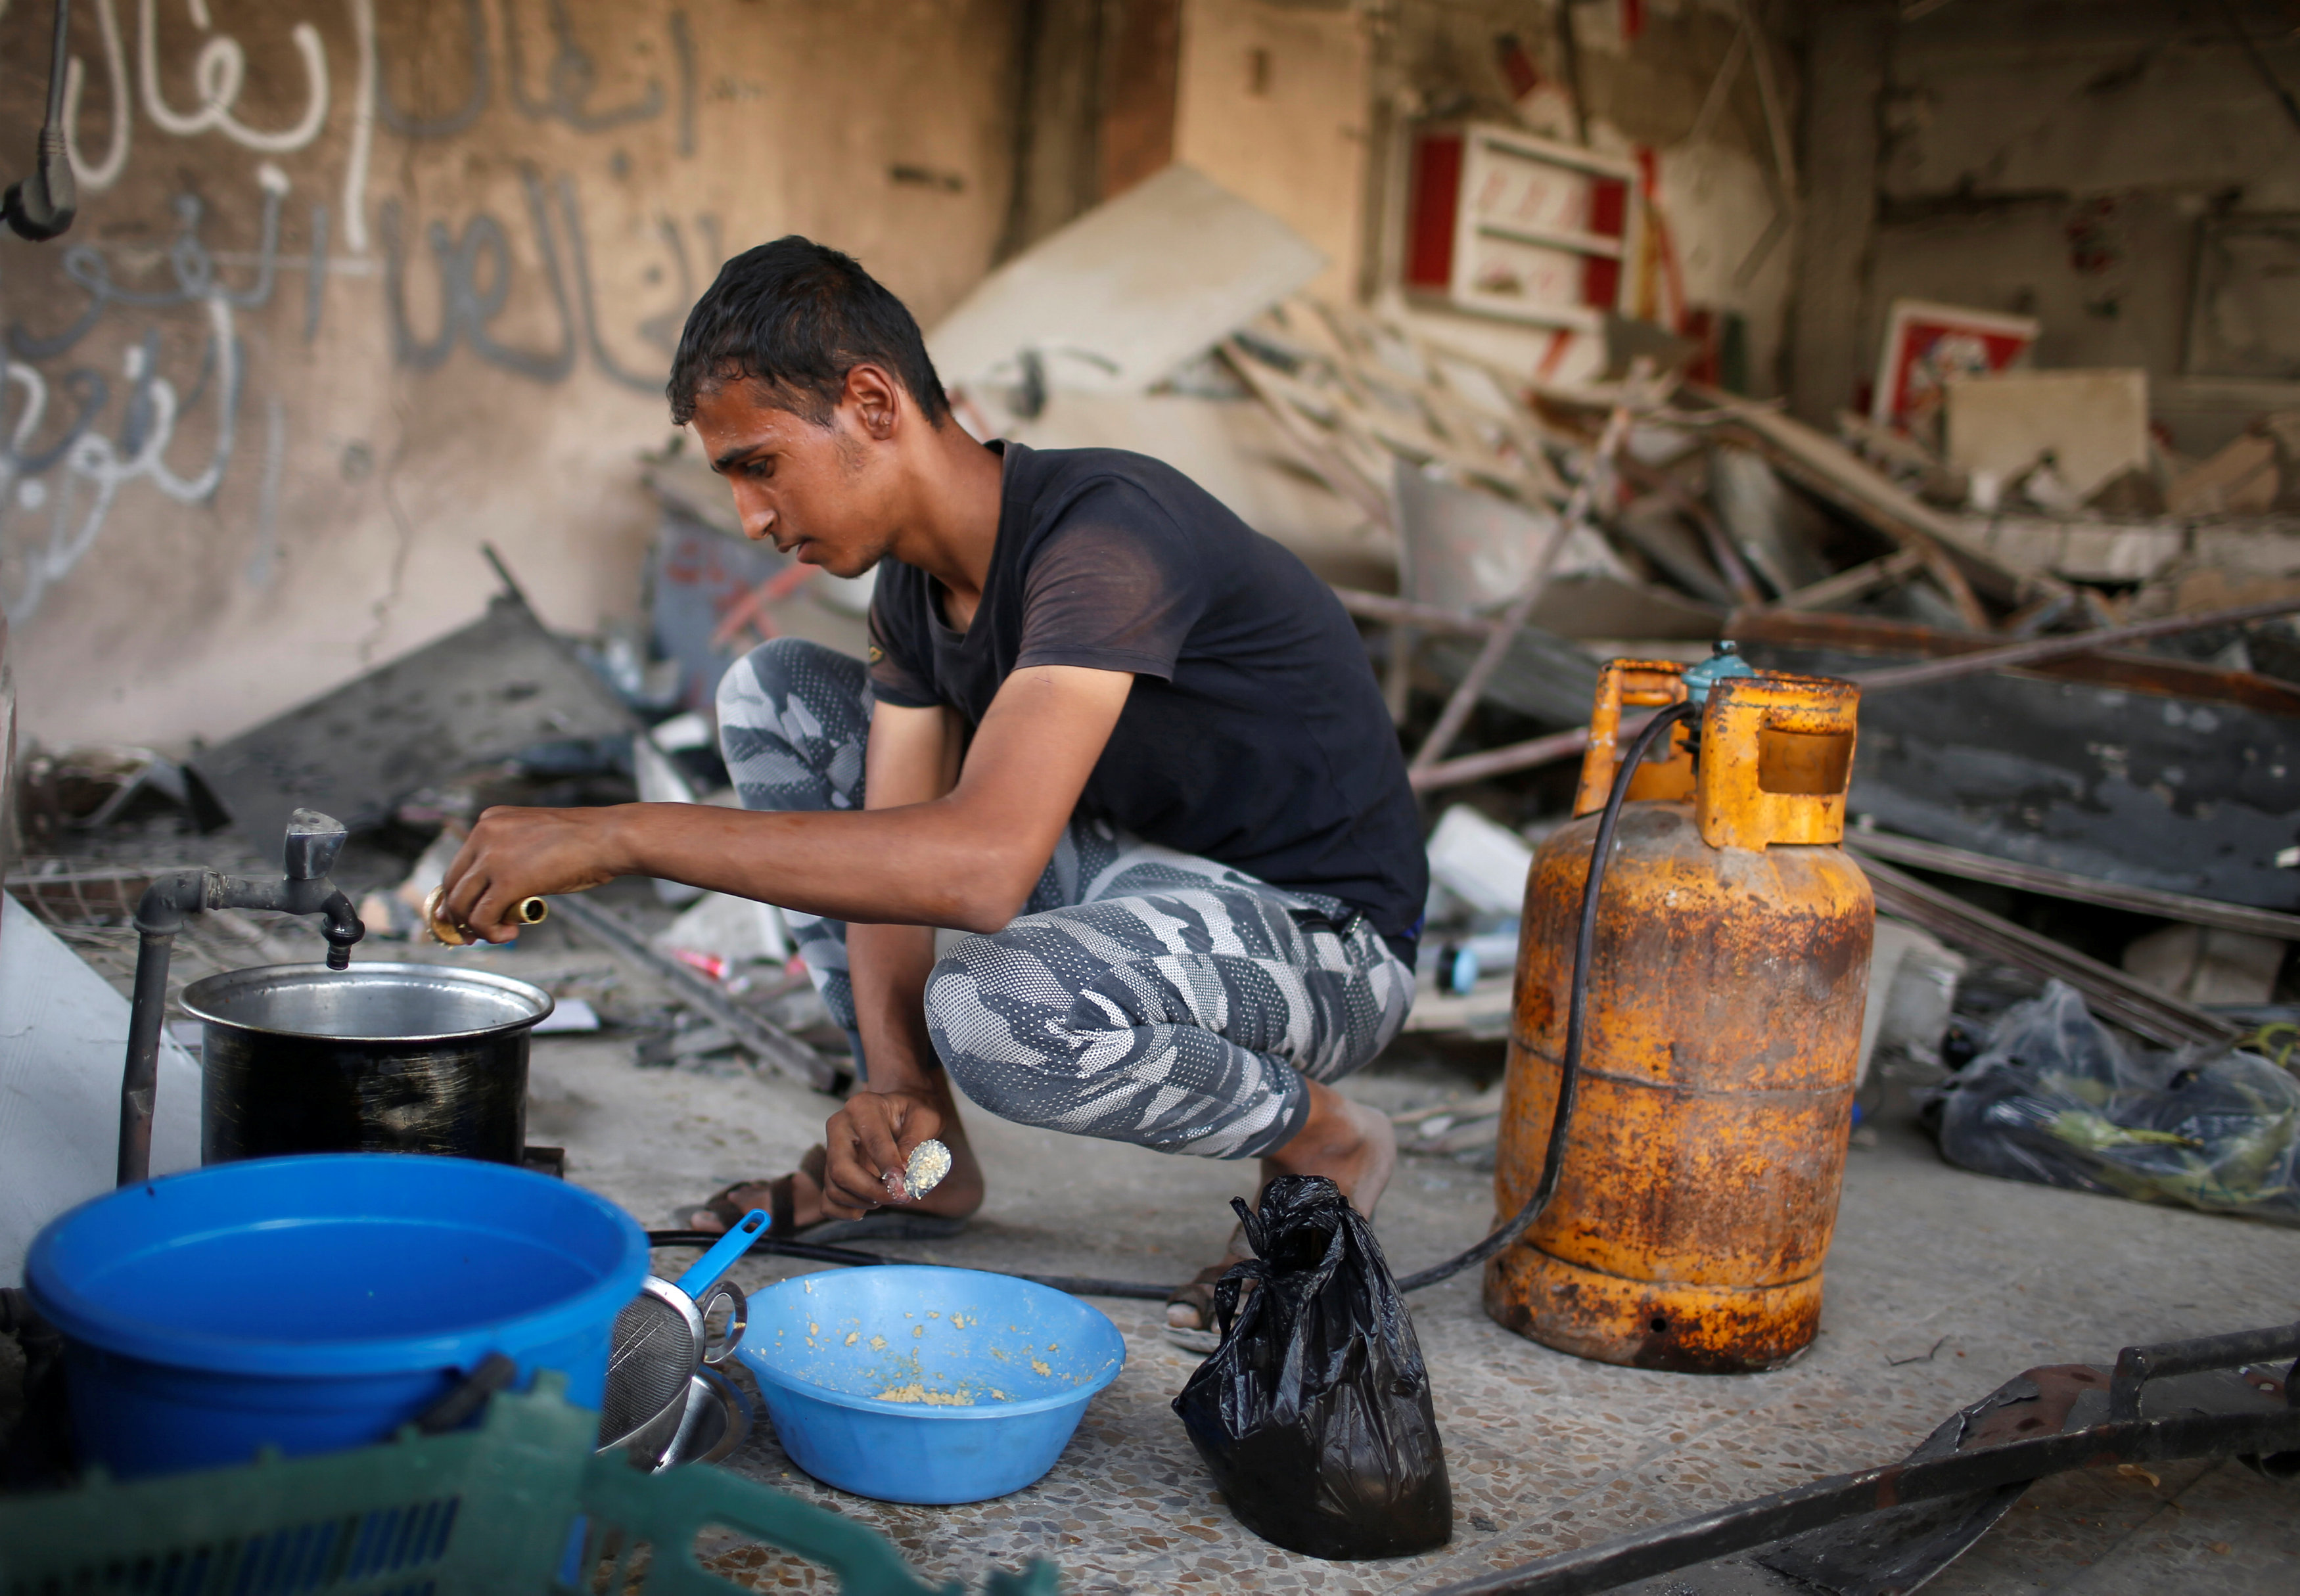 In pictures: Daily life in Iraq's city of Mosul